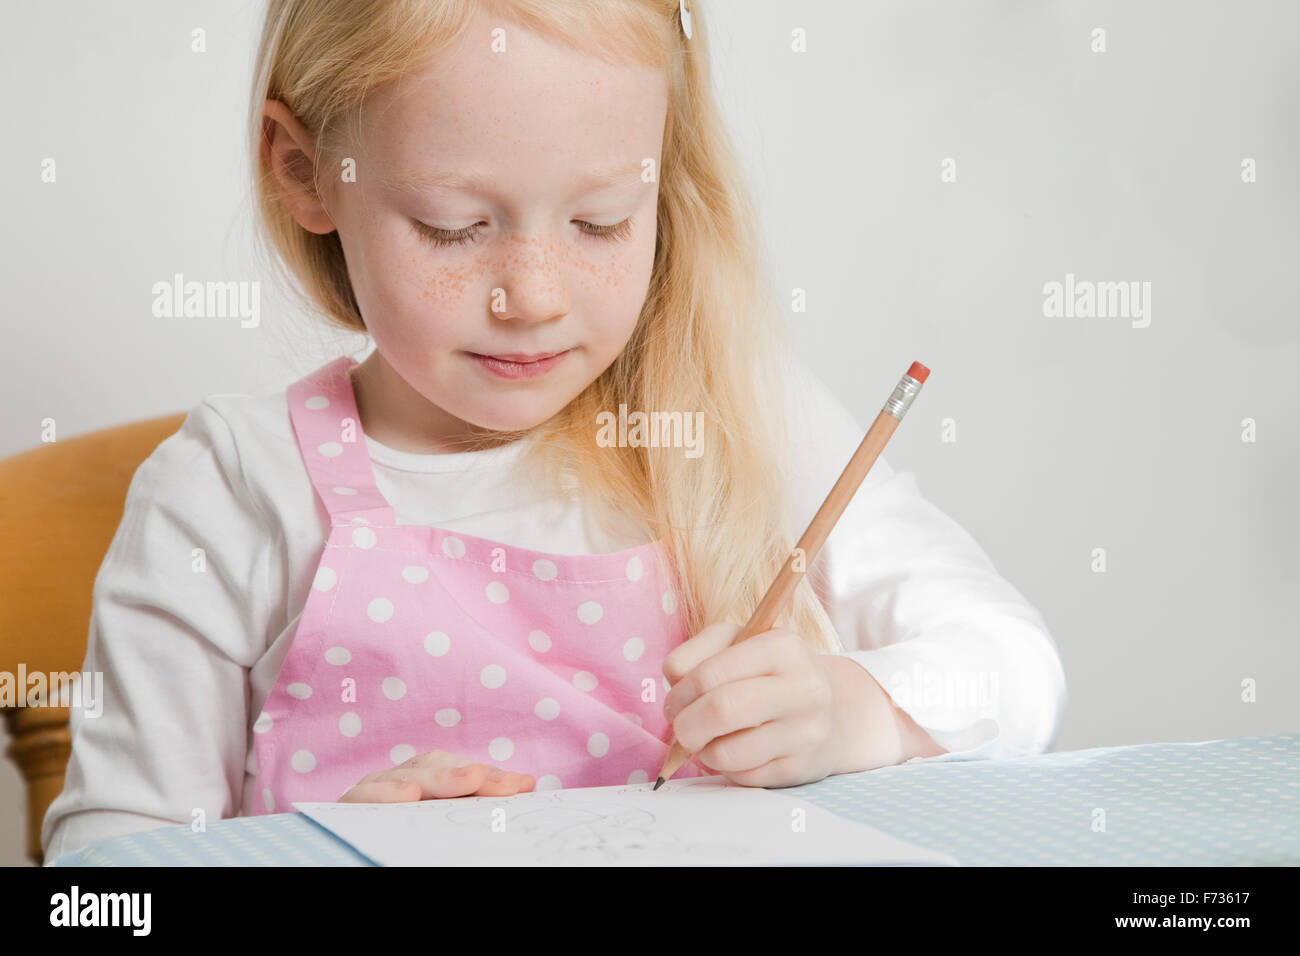 A girl sitting at a table drawing. Stock Photo